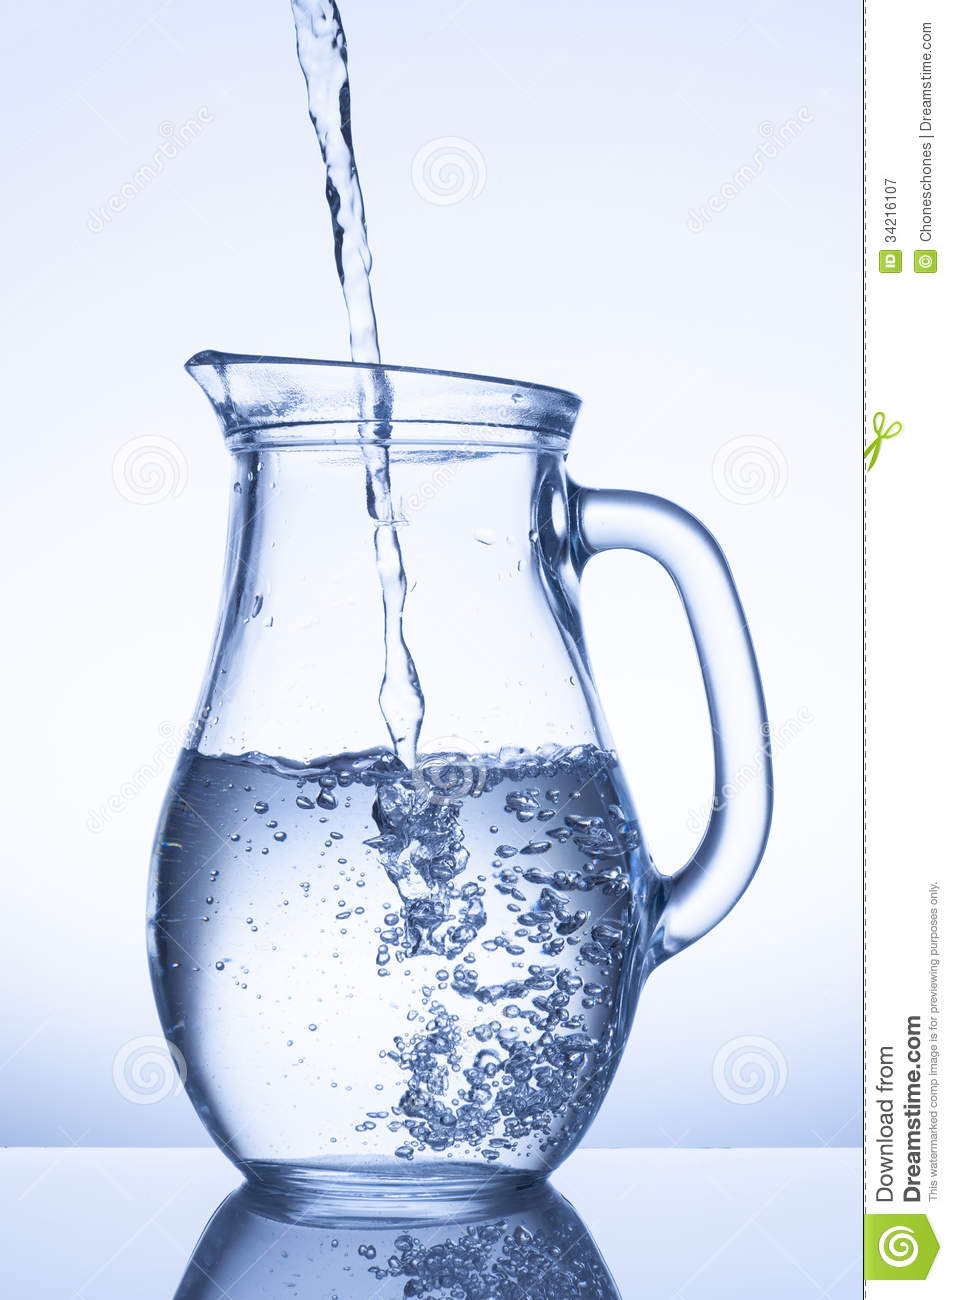 Water In A Jug Royalty Free Stock Photography   Image  34216107